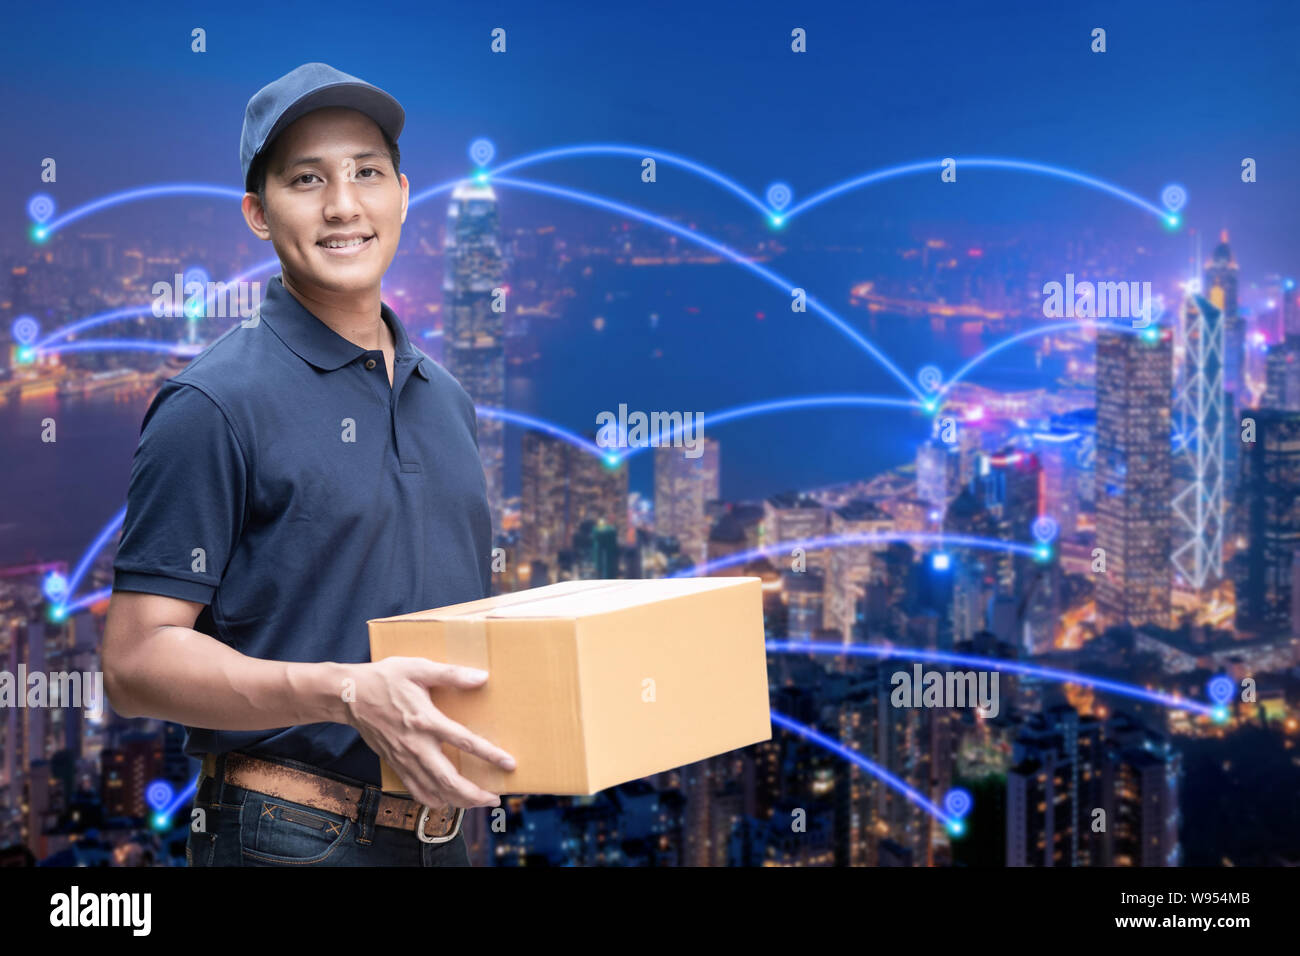 Asian delivery man holding a cardboard box with networking of internet of things in smart city for e-commerce and logistics concept. Stock Photo